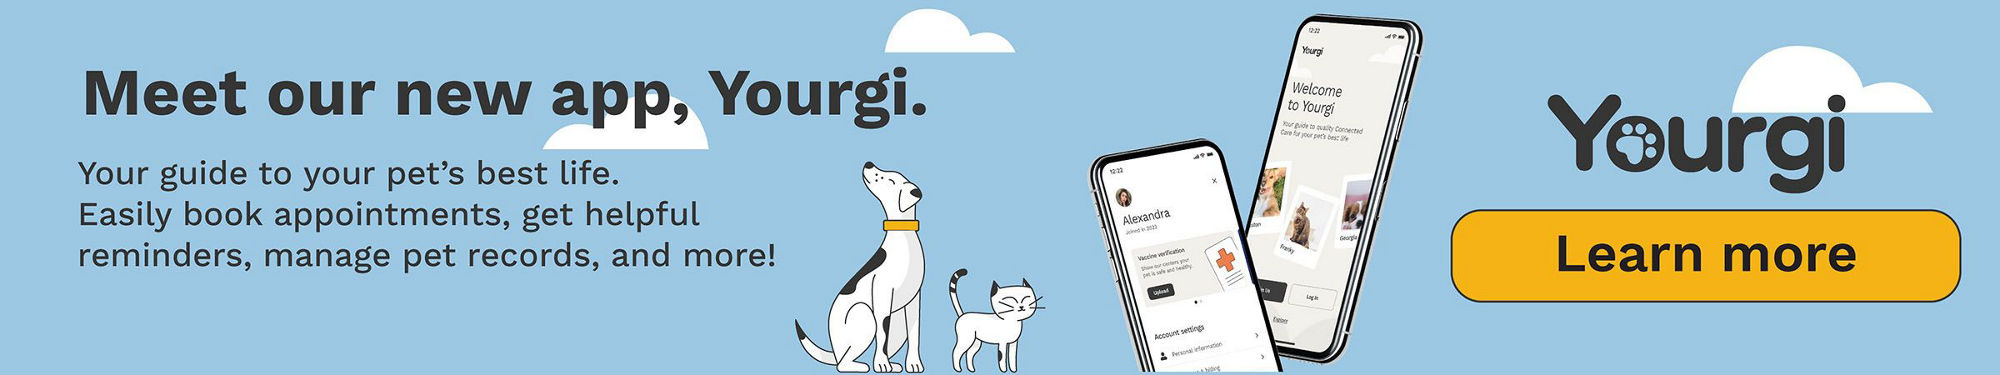 yourgi banner